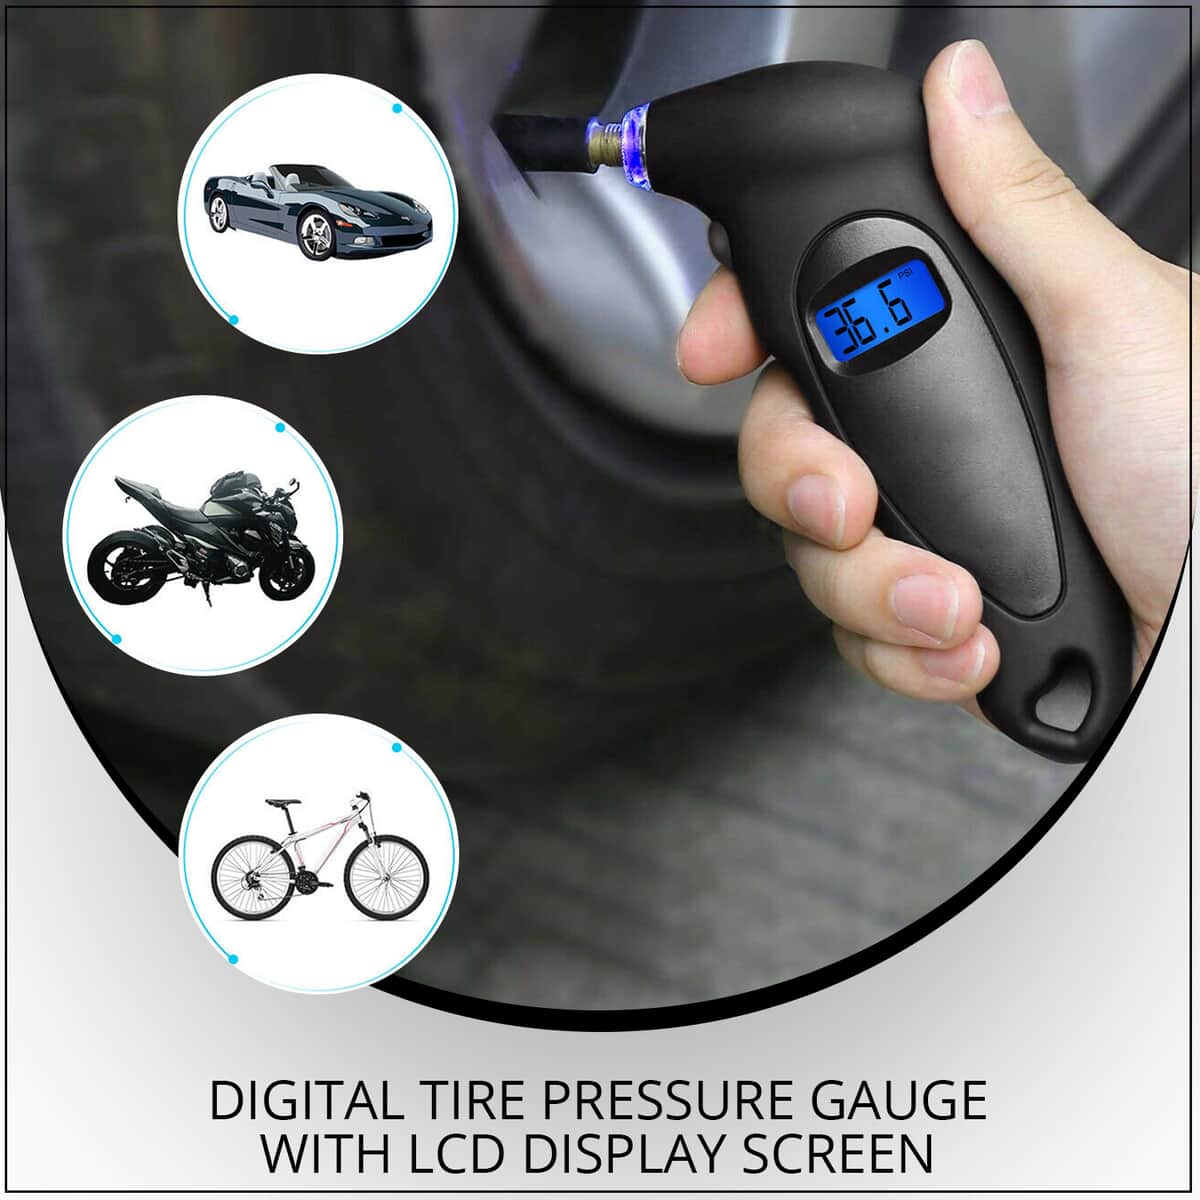 Heavy Duty Battery Operated Black Digital Tire Pressure Gauge with Backlit LCD Display Screen, Tire Inflator, Lighted Nozzle, Non-slip Handle Grip image number 1